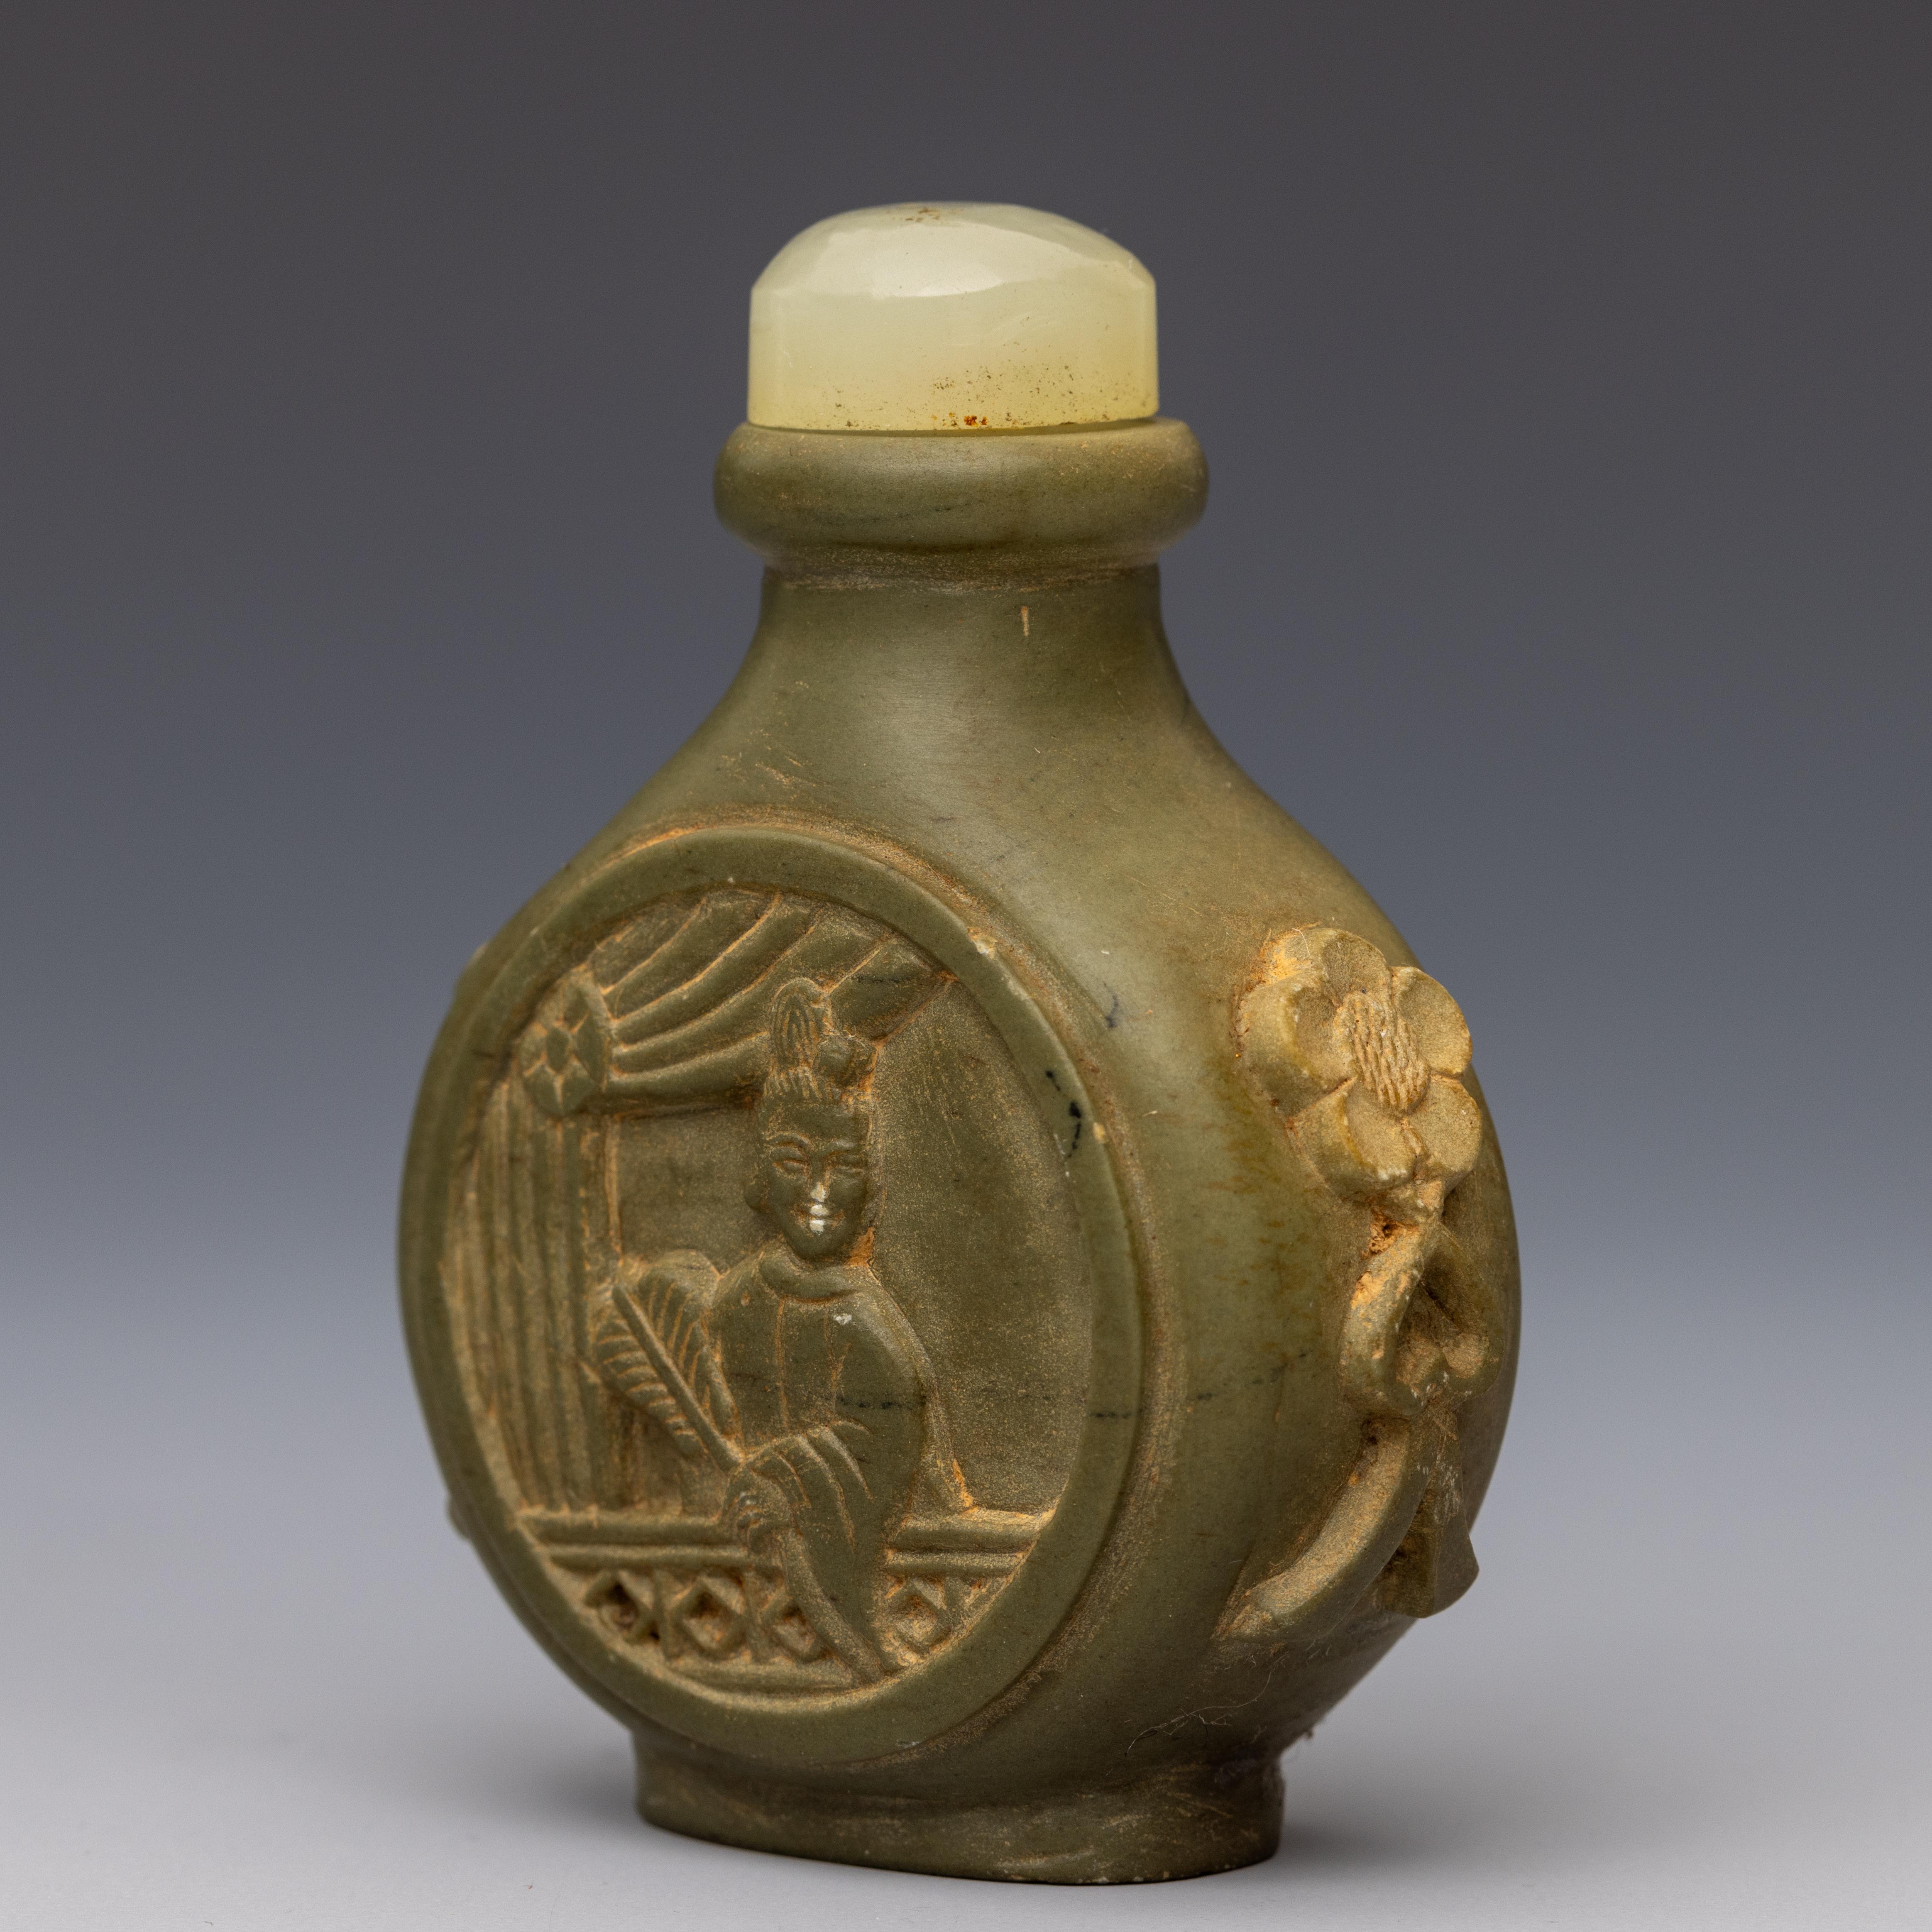 China, a zisha Yixing snuff bottle and stopper, late Qing dynasty (1644-1912) - Image 2 of 3